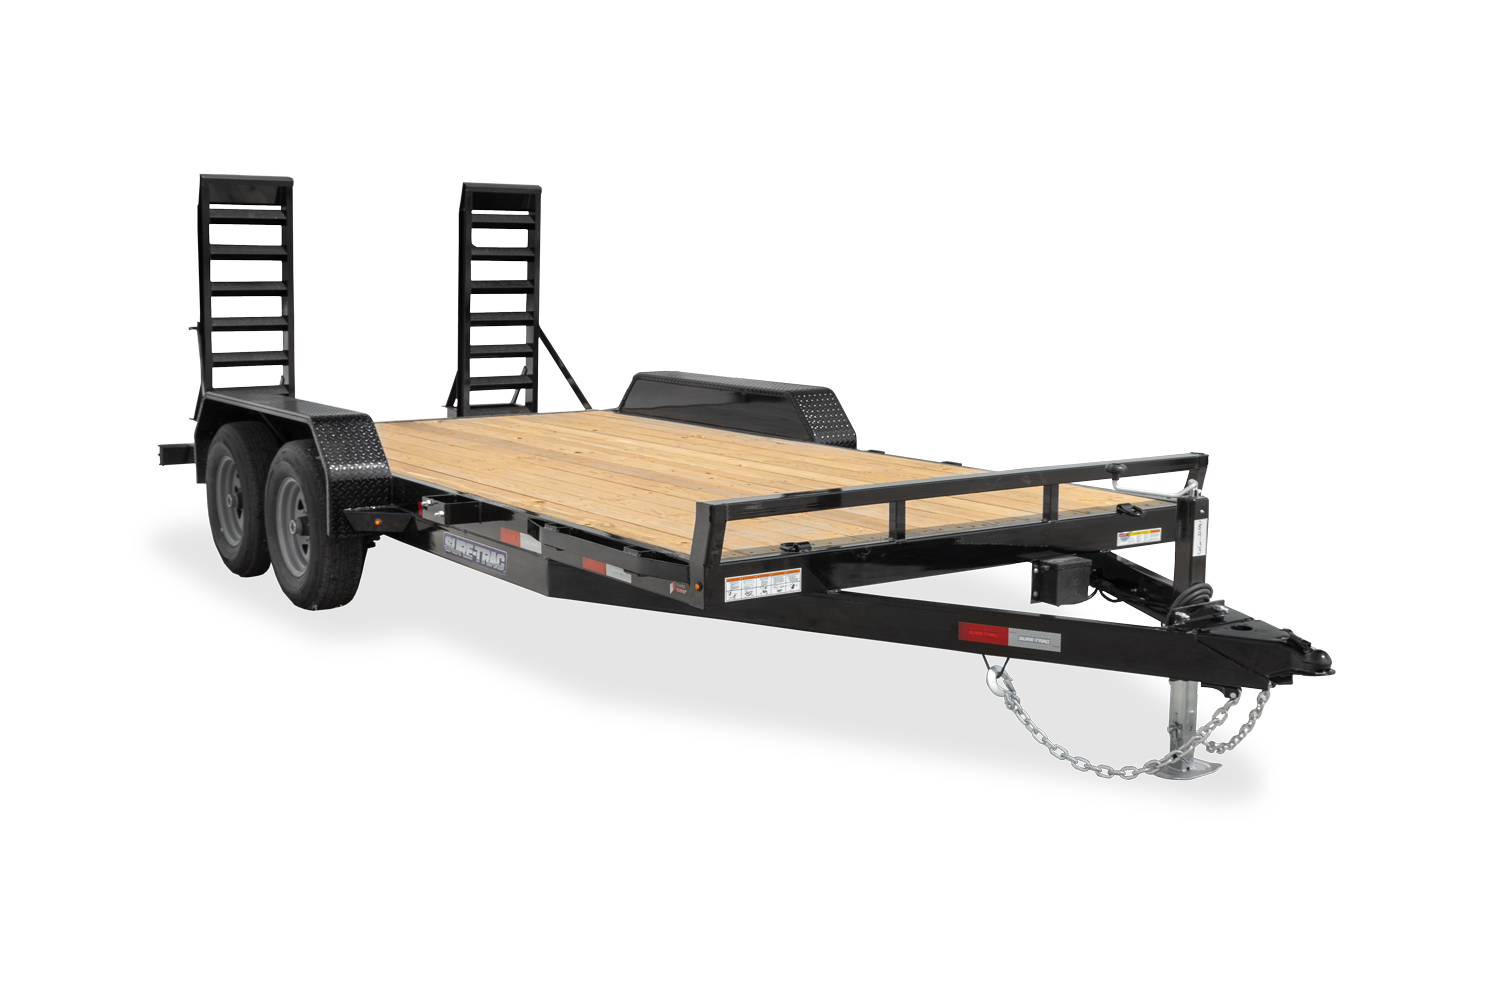 Front Angle of the 10K Model of the Sure-TracEquipment Trailer